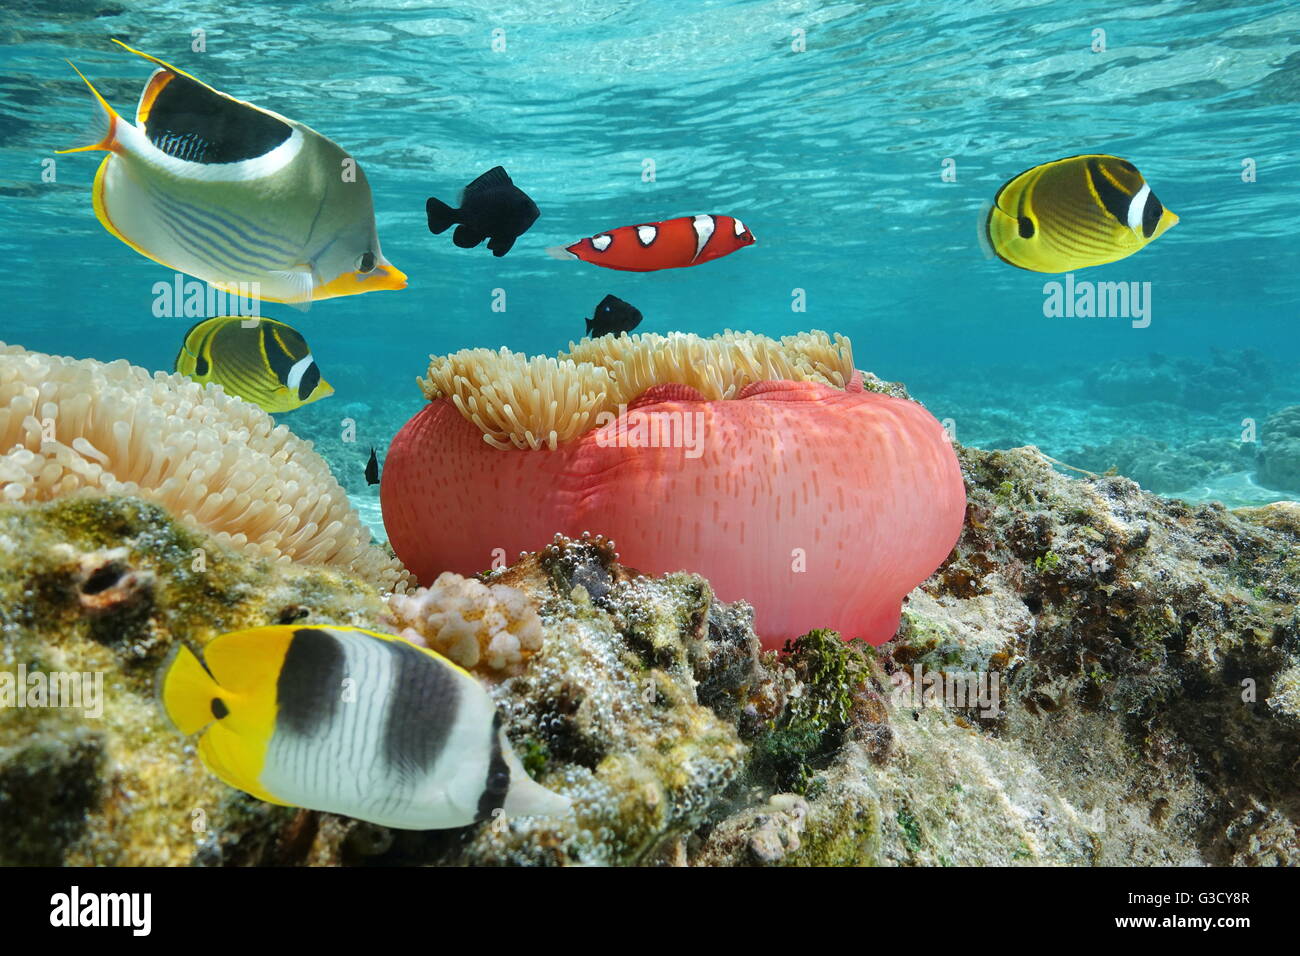 Colorful fishes with a sea anemone underwater in the lagoon, Pacific ocean, French Polynesia Stock Photo